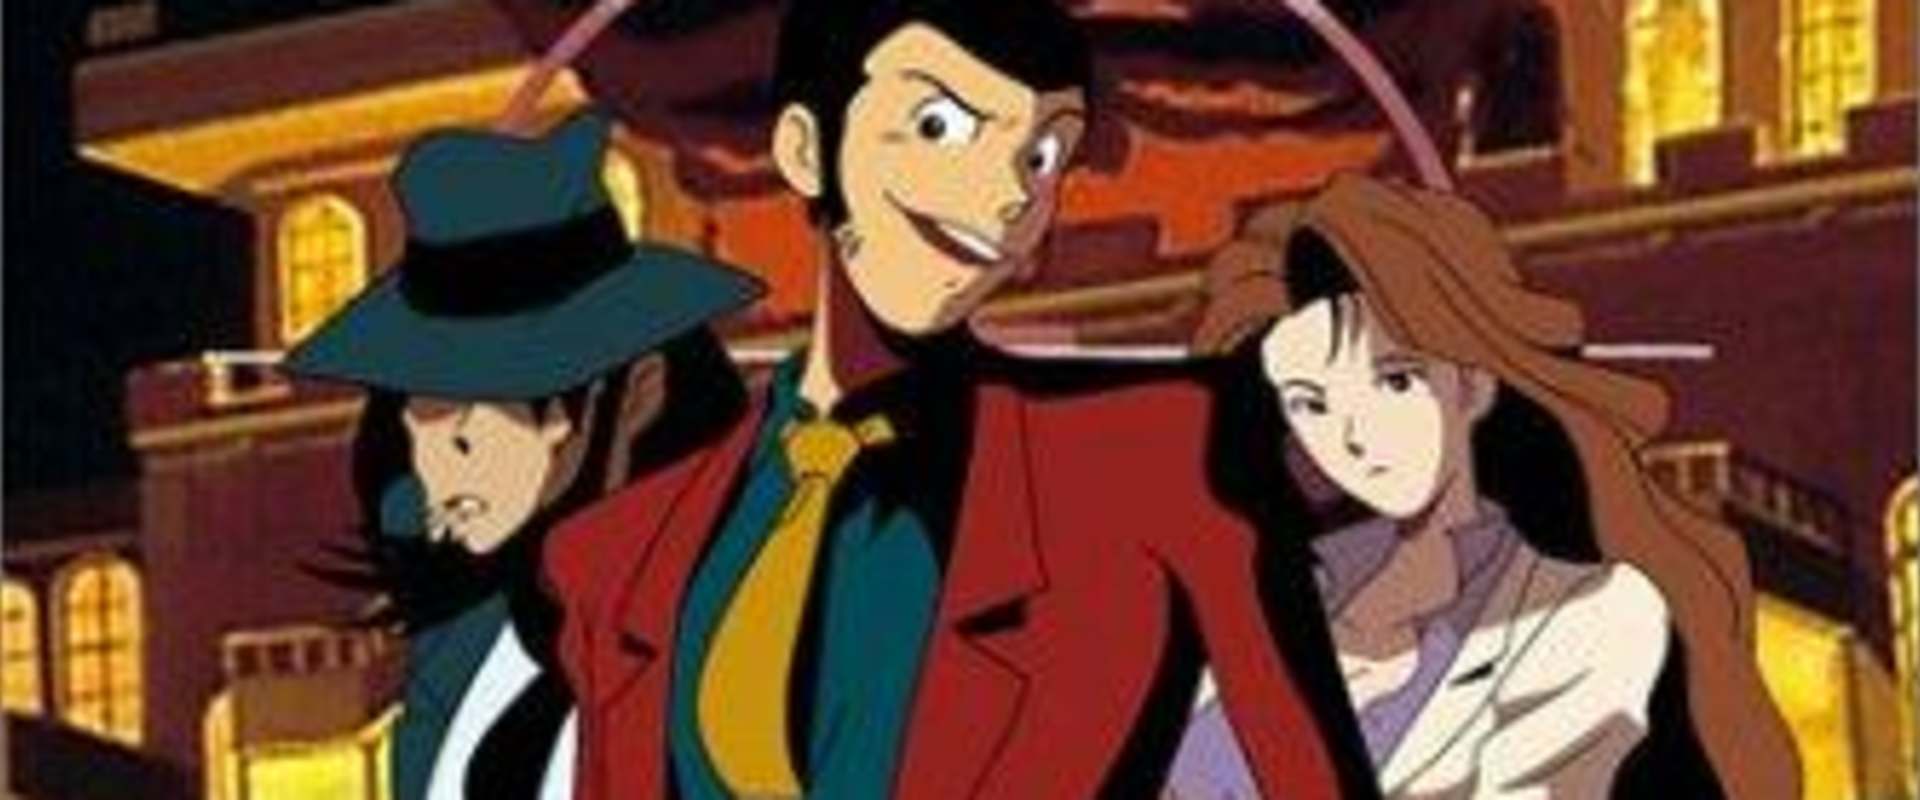 Lupin the Third: Voyage to Danger background 1